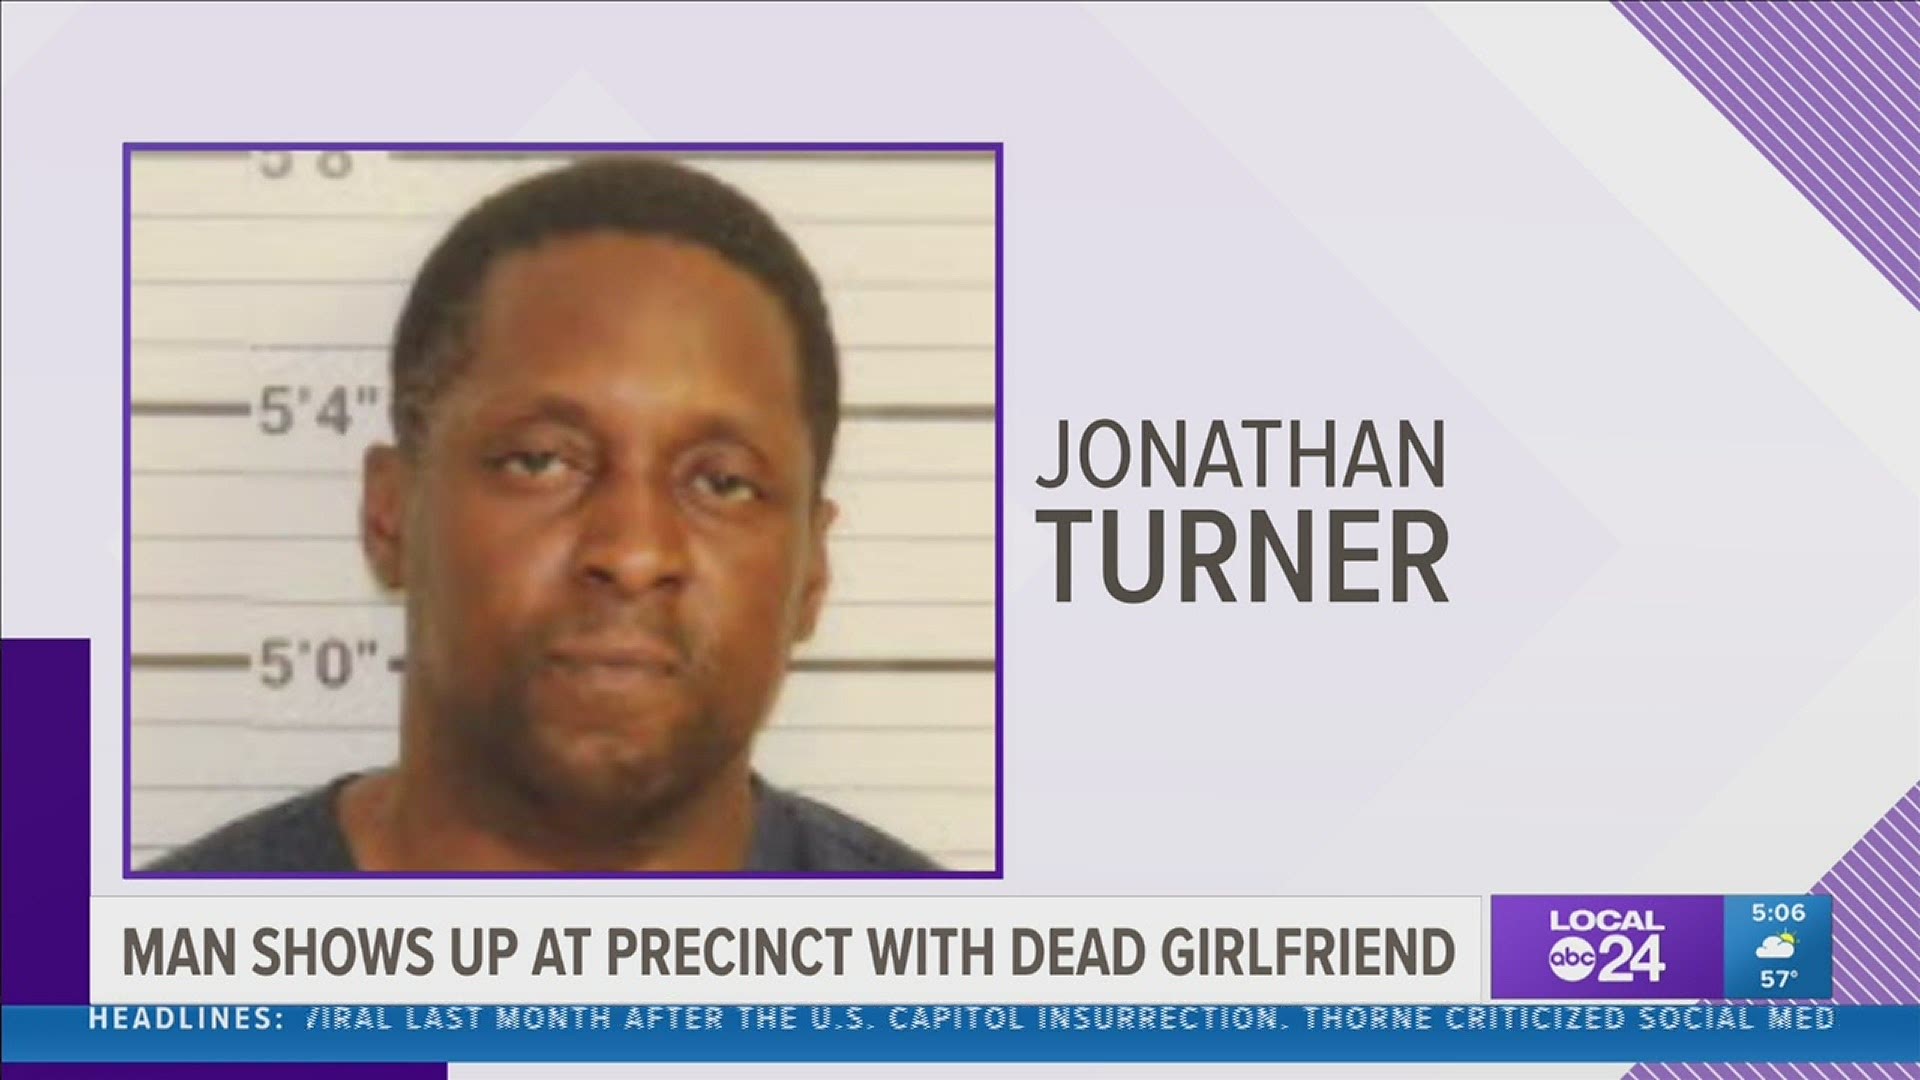 Jonathan Turner drove to MPD Raines Station and told officers "I just shot my girl"